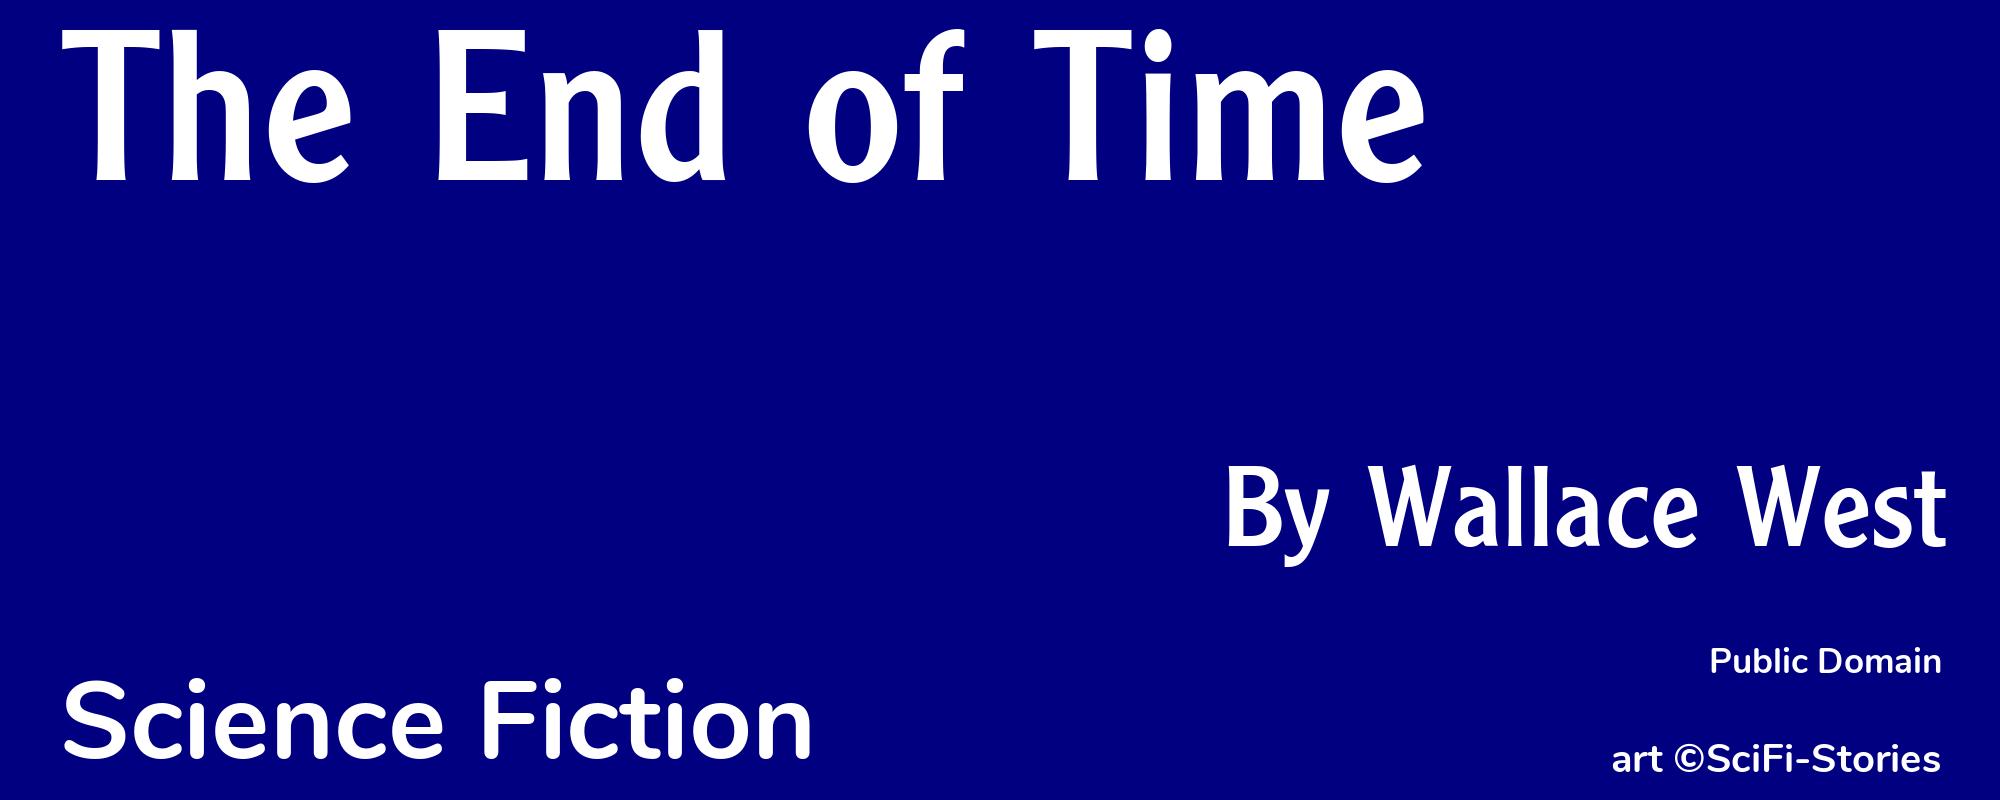 The End of Time - Cover